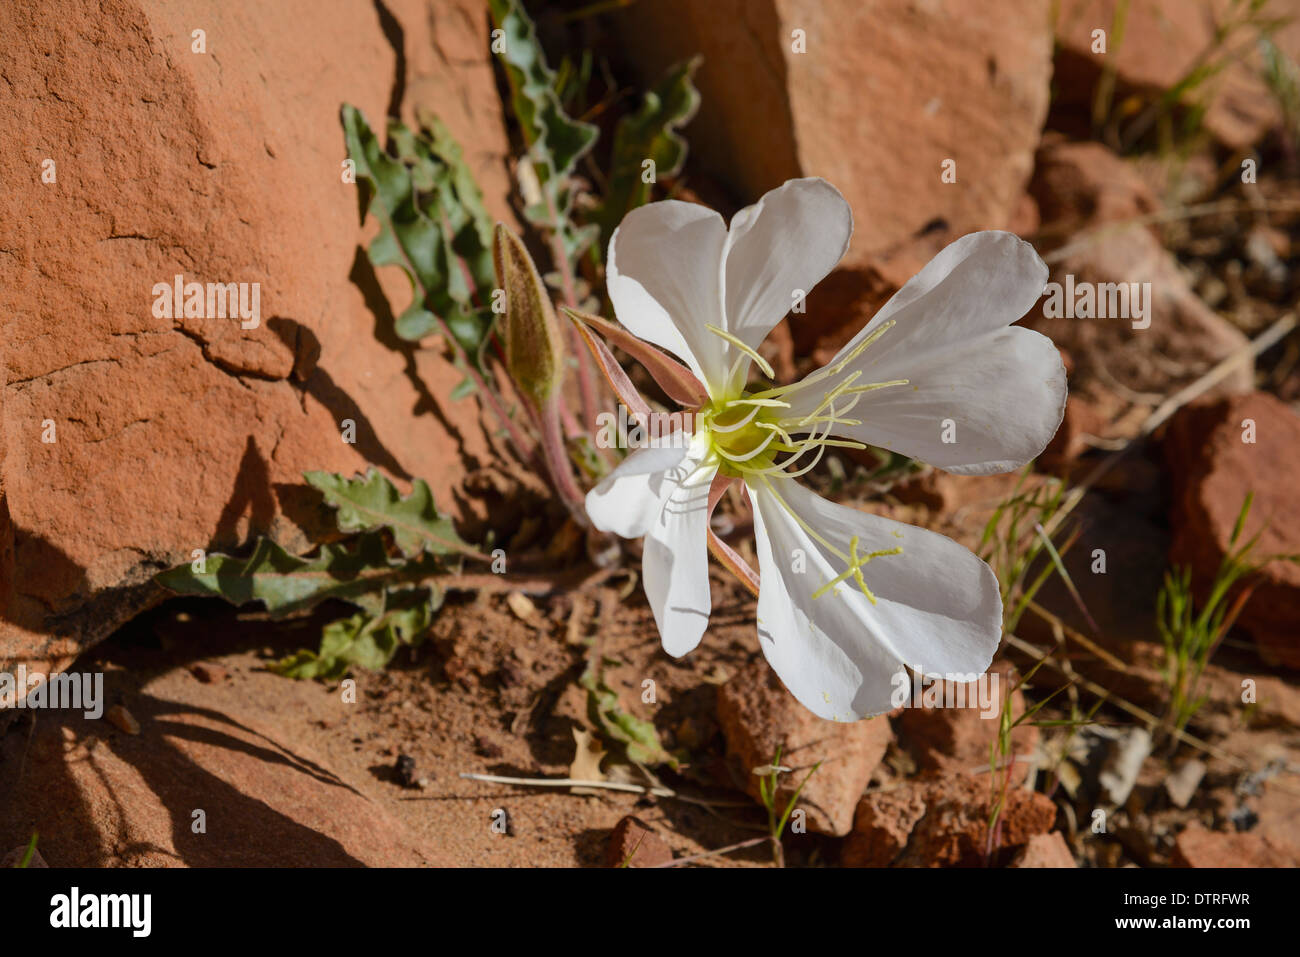 Tufted Evening-Primrose, oenothera caespitosa nutt., also known as Morning-Lily, Wildflowers, Zion National Park, Utah, USA Stock Photo